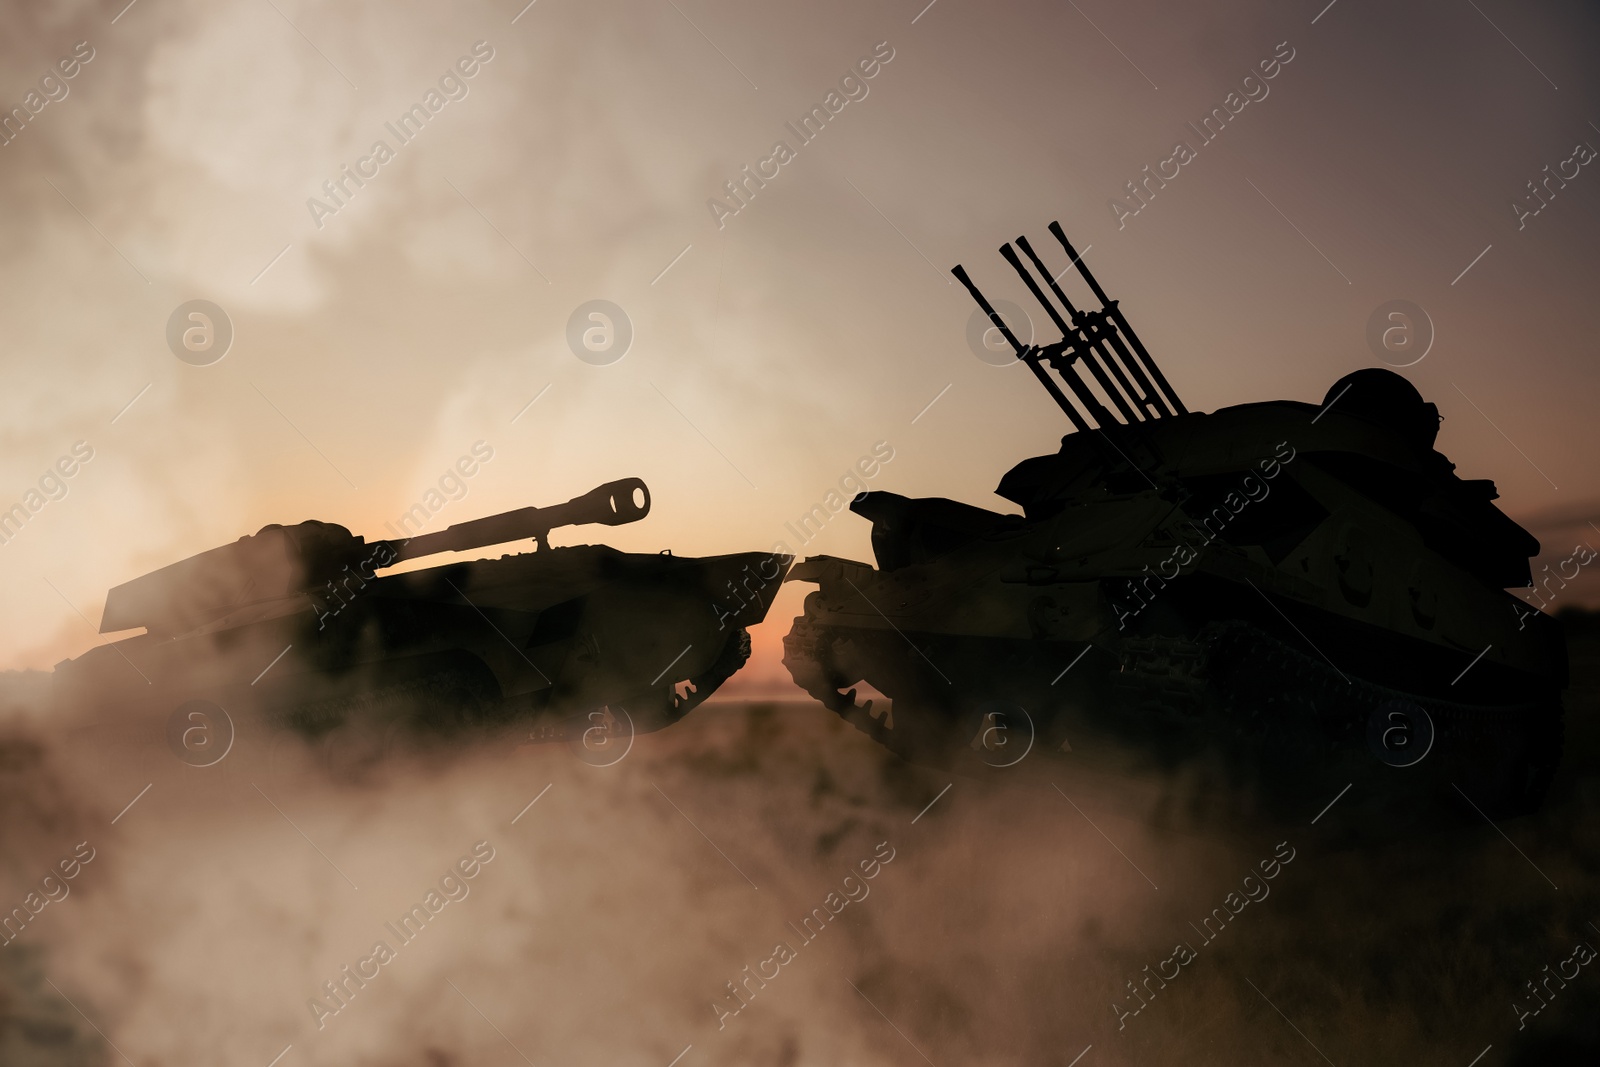 Image of Silhouettes of armored fighting vehicle and tank on battlefield